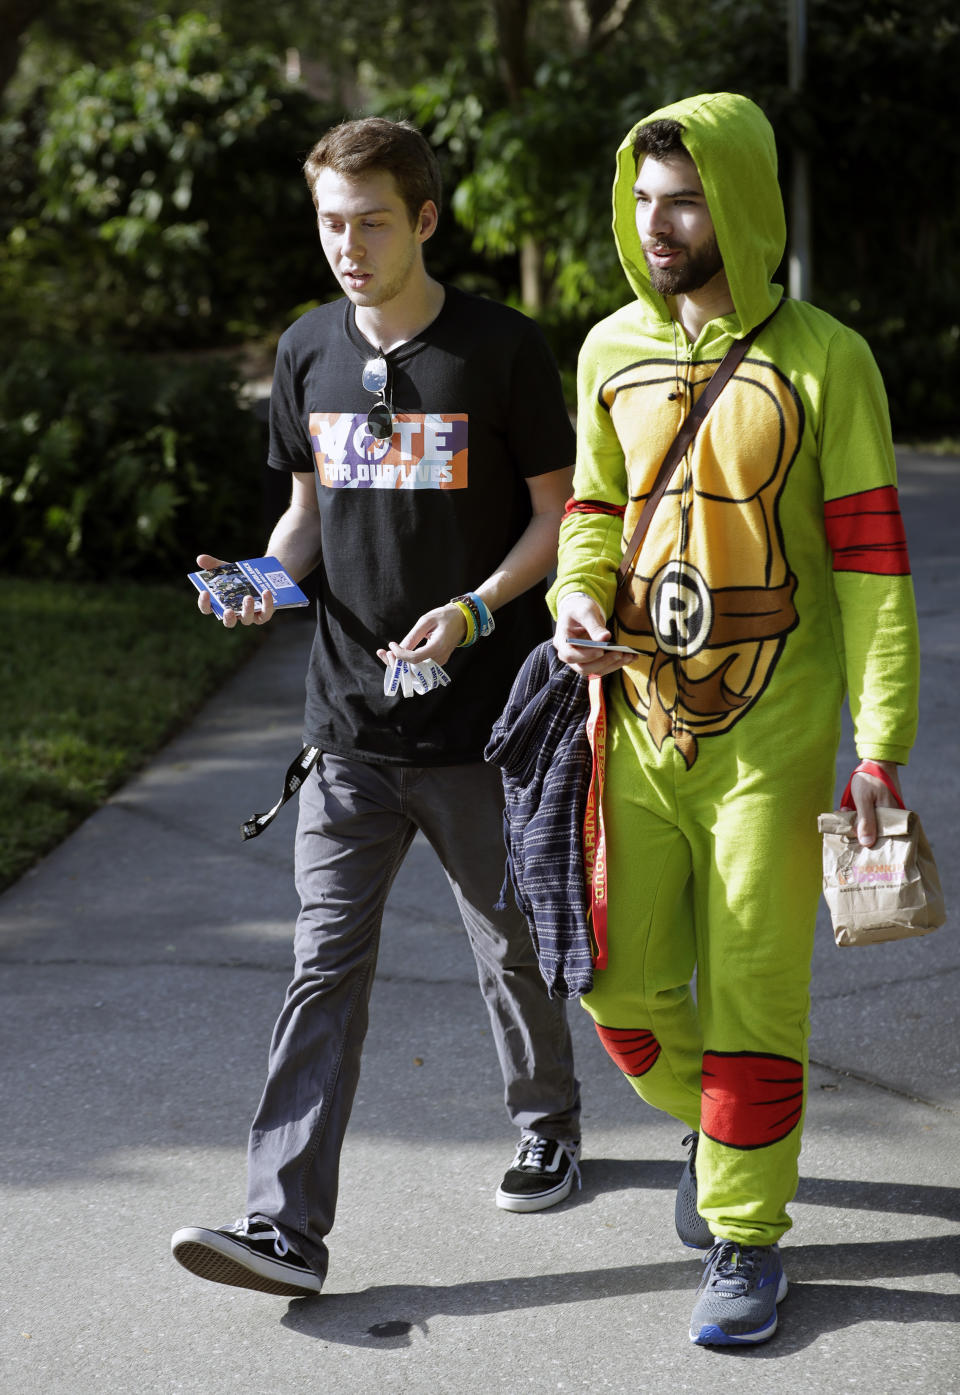 In this Wednesday, Oct. 31, 2018 photo, Bradley Thornton, left, a student volunteer, escorts Gabriel Sanchez to a polling place on campus during a Vote for Our Lives event at the University of Central Florida in Orlando, Fla. Nine months after 17 classmates and teachers were gunned down at their Florida school, Parkland students are finally facing the moment they’ve been leading up to with marches, school walkouts and voter-registration events throughout the country: their first Election Day. (AP Photo/John Raoux)